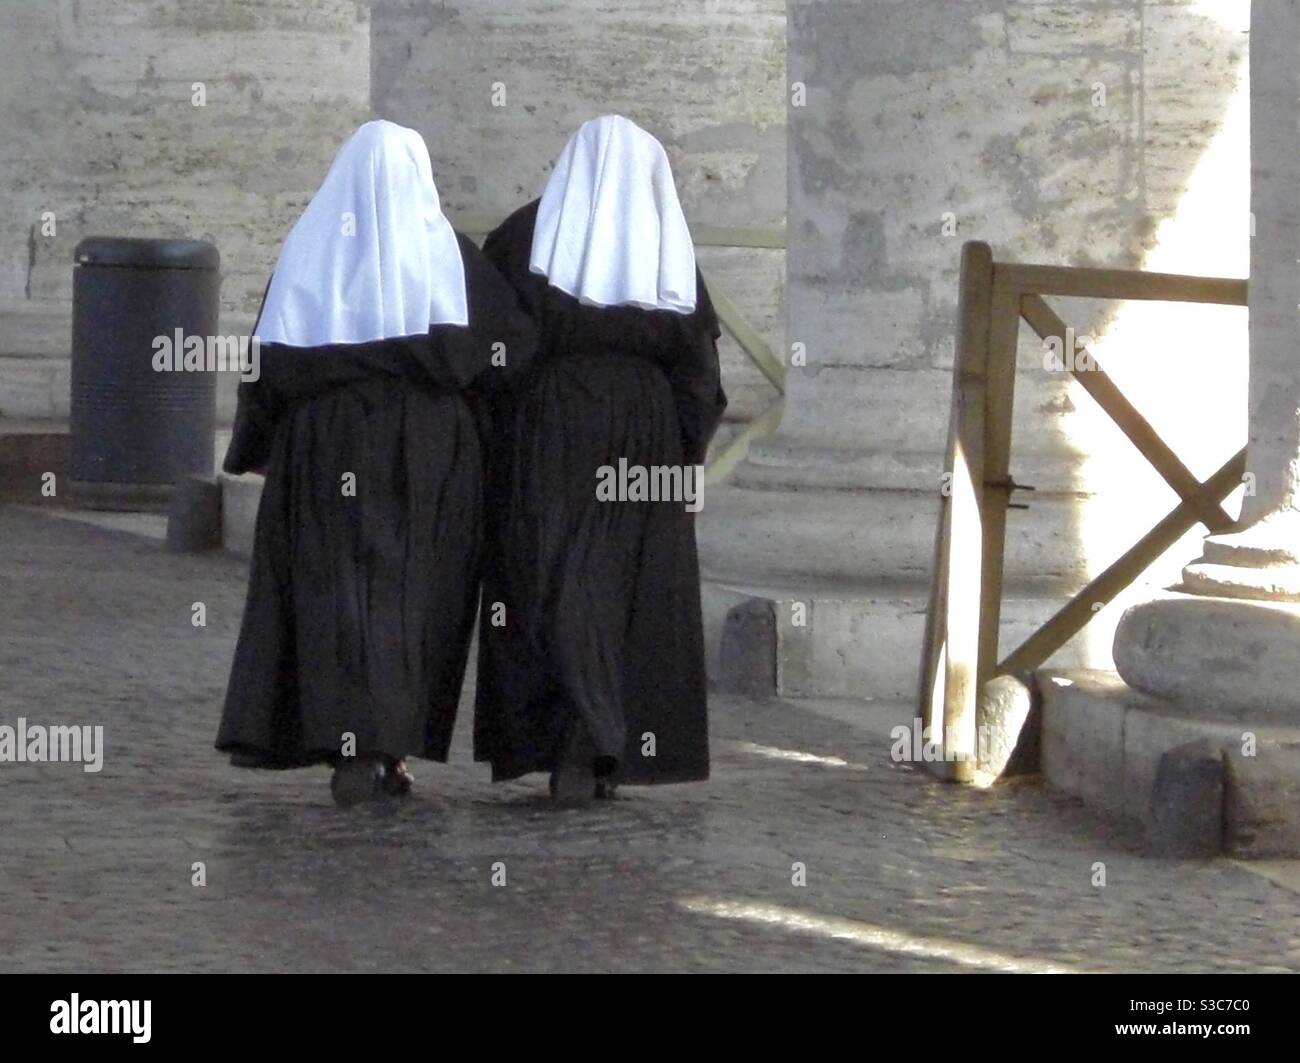 Two nuns in black and white dress walk towards a bin in Rome, Italy Stock Photo